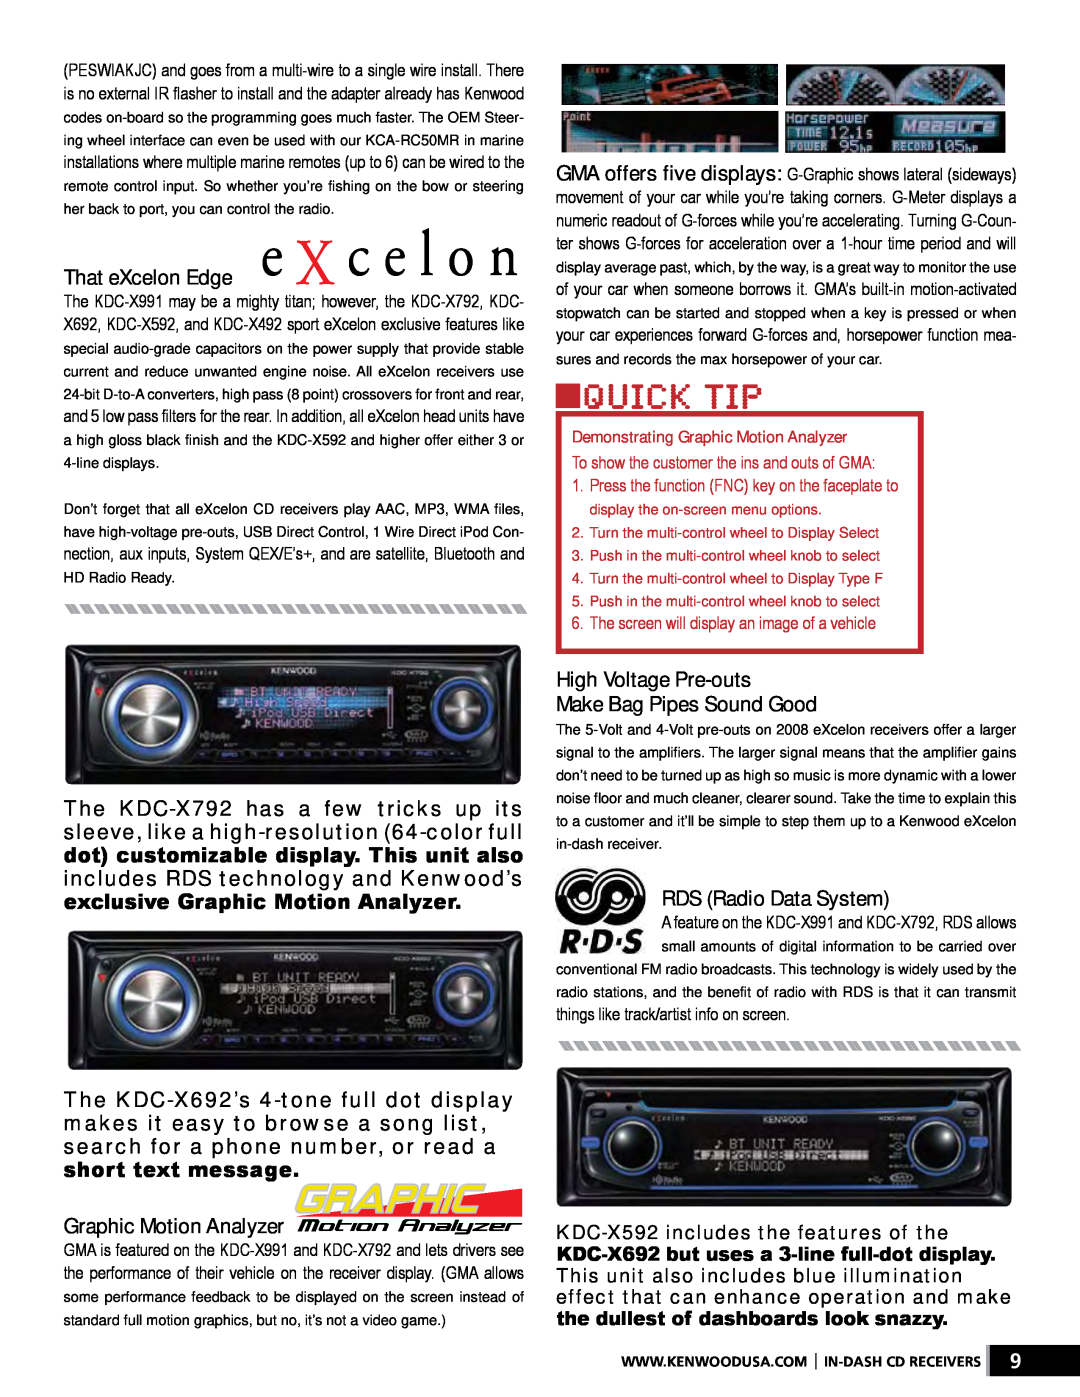 Kenwood XR-S17P manual That eXcelon Edge, High Voltage Pre-outs Make Bag Pipes Sound Good, RDS Radio Data System 